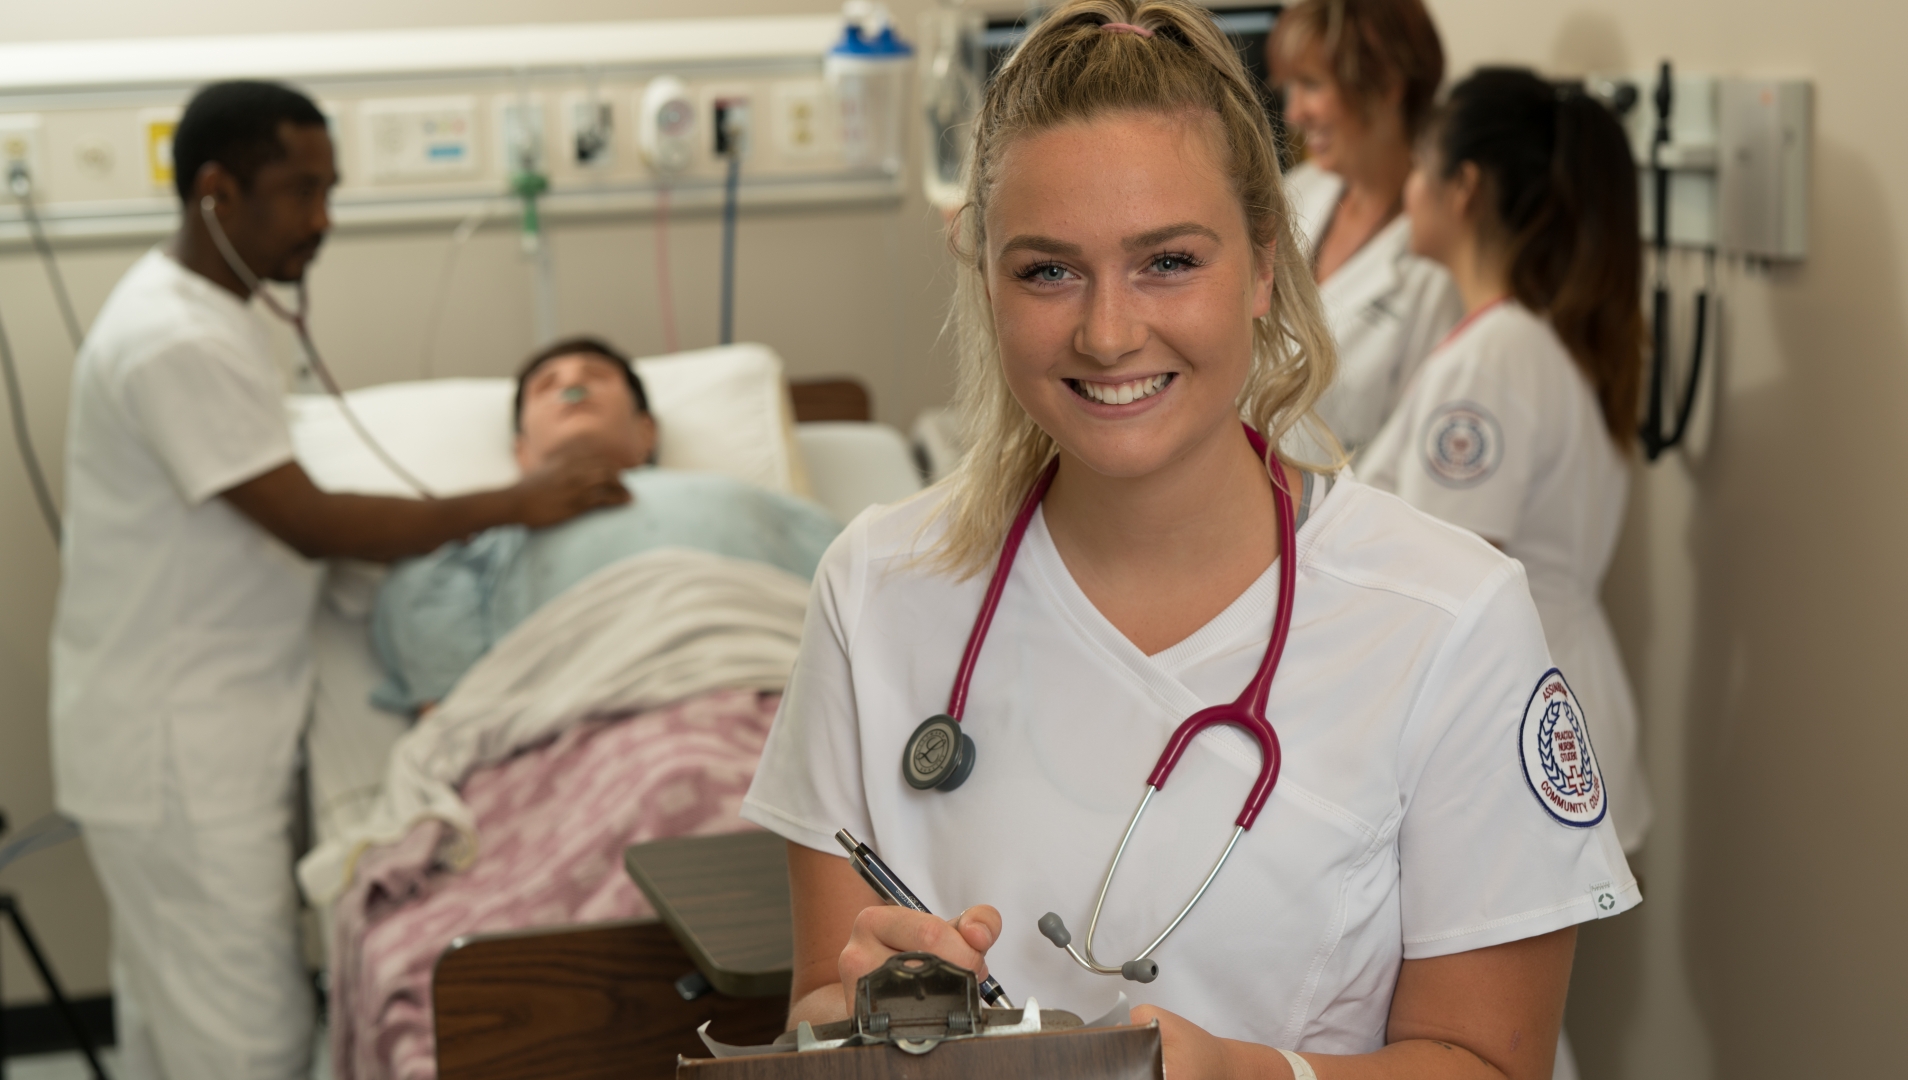 The college received investments from both the provincial government and private donors, in support of Practical Nursing